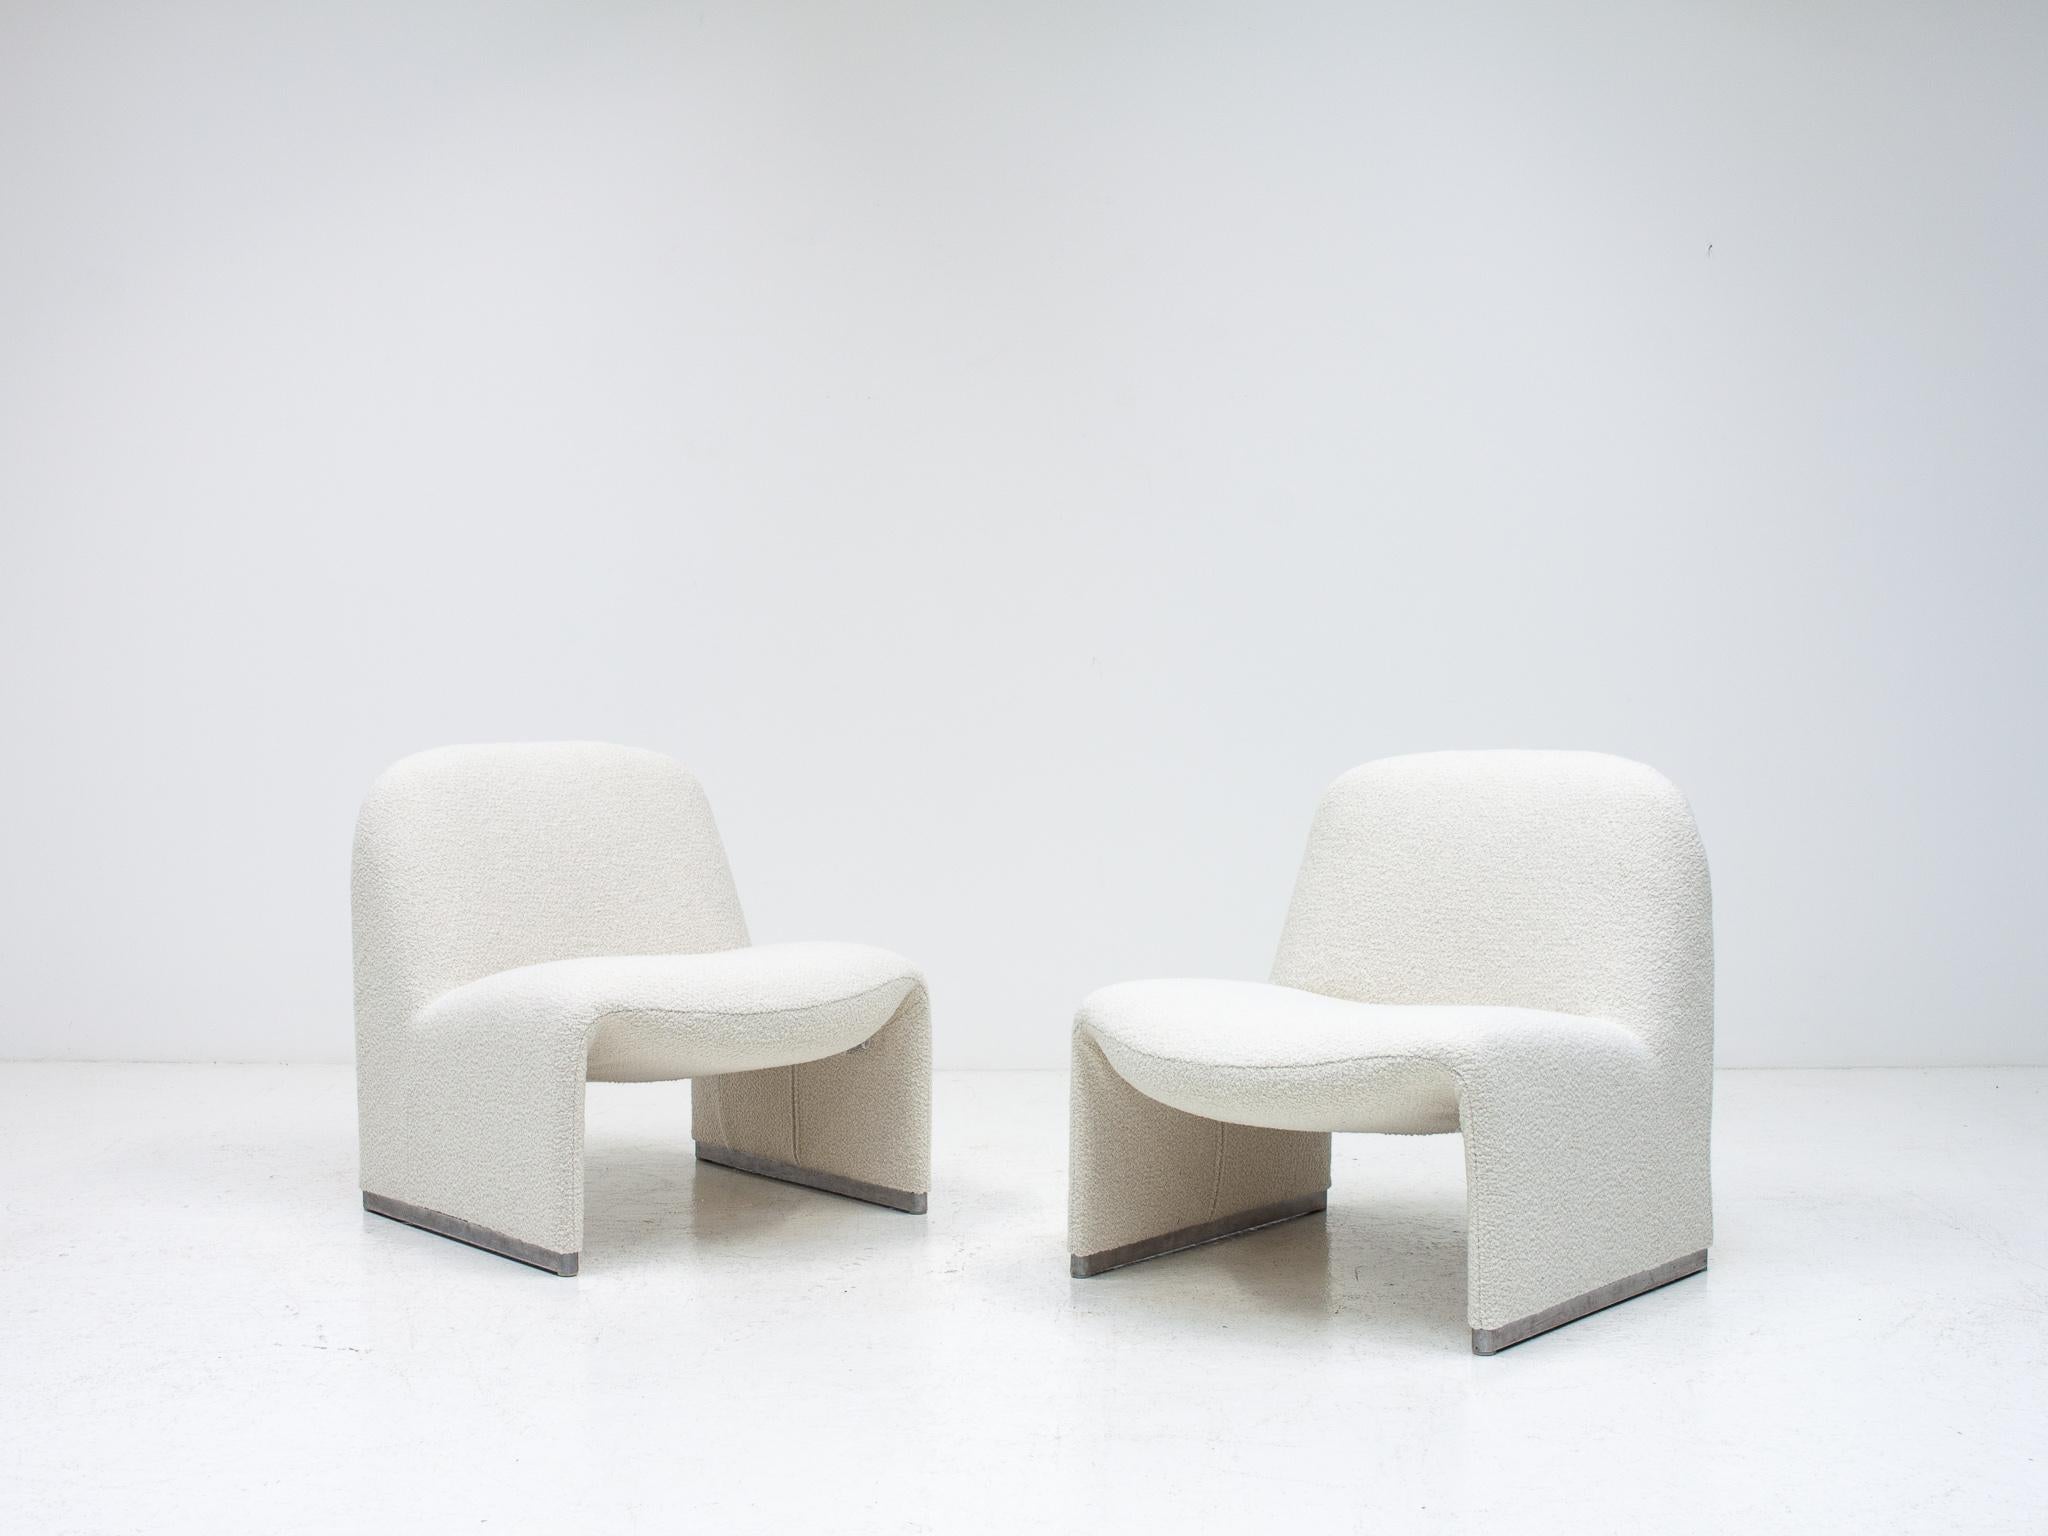 A pair of Giancarlo Piretti “Alky” chairs newly upholstered in a 'Parchment' colored Yarn Collective bouclé fabric.  

Parchment is a light, neutral, sepia, off-white colour, we have included screenshots from the fabric manufacturer's website to